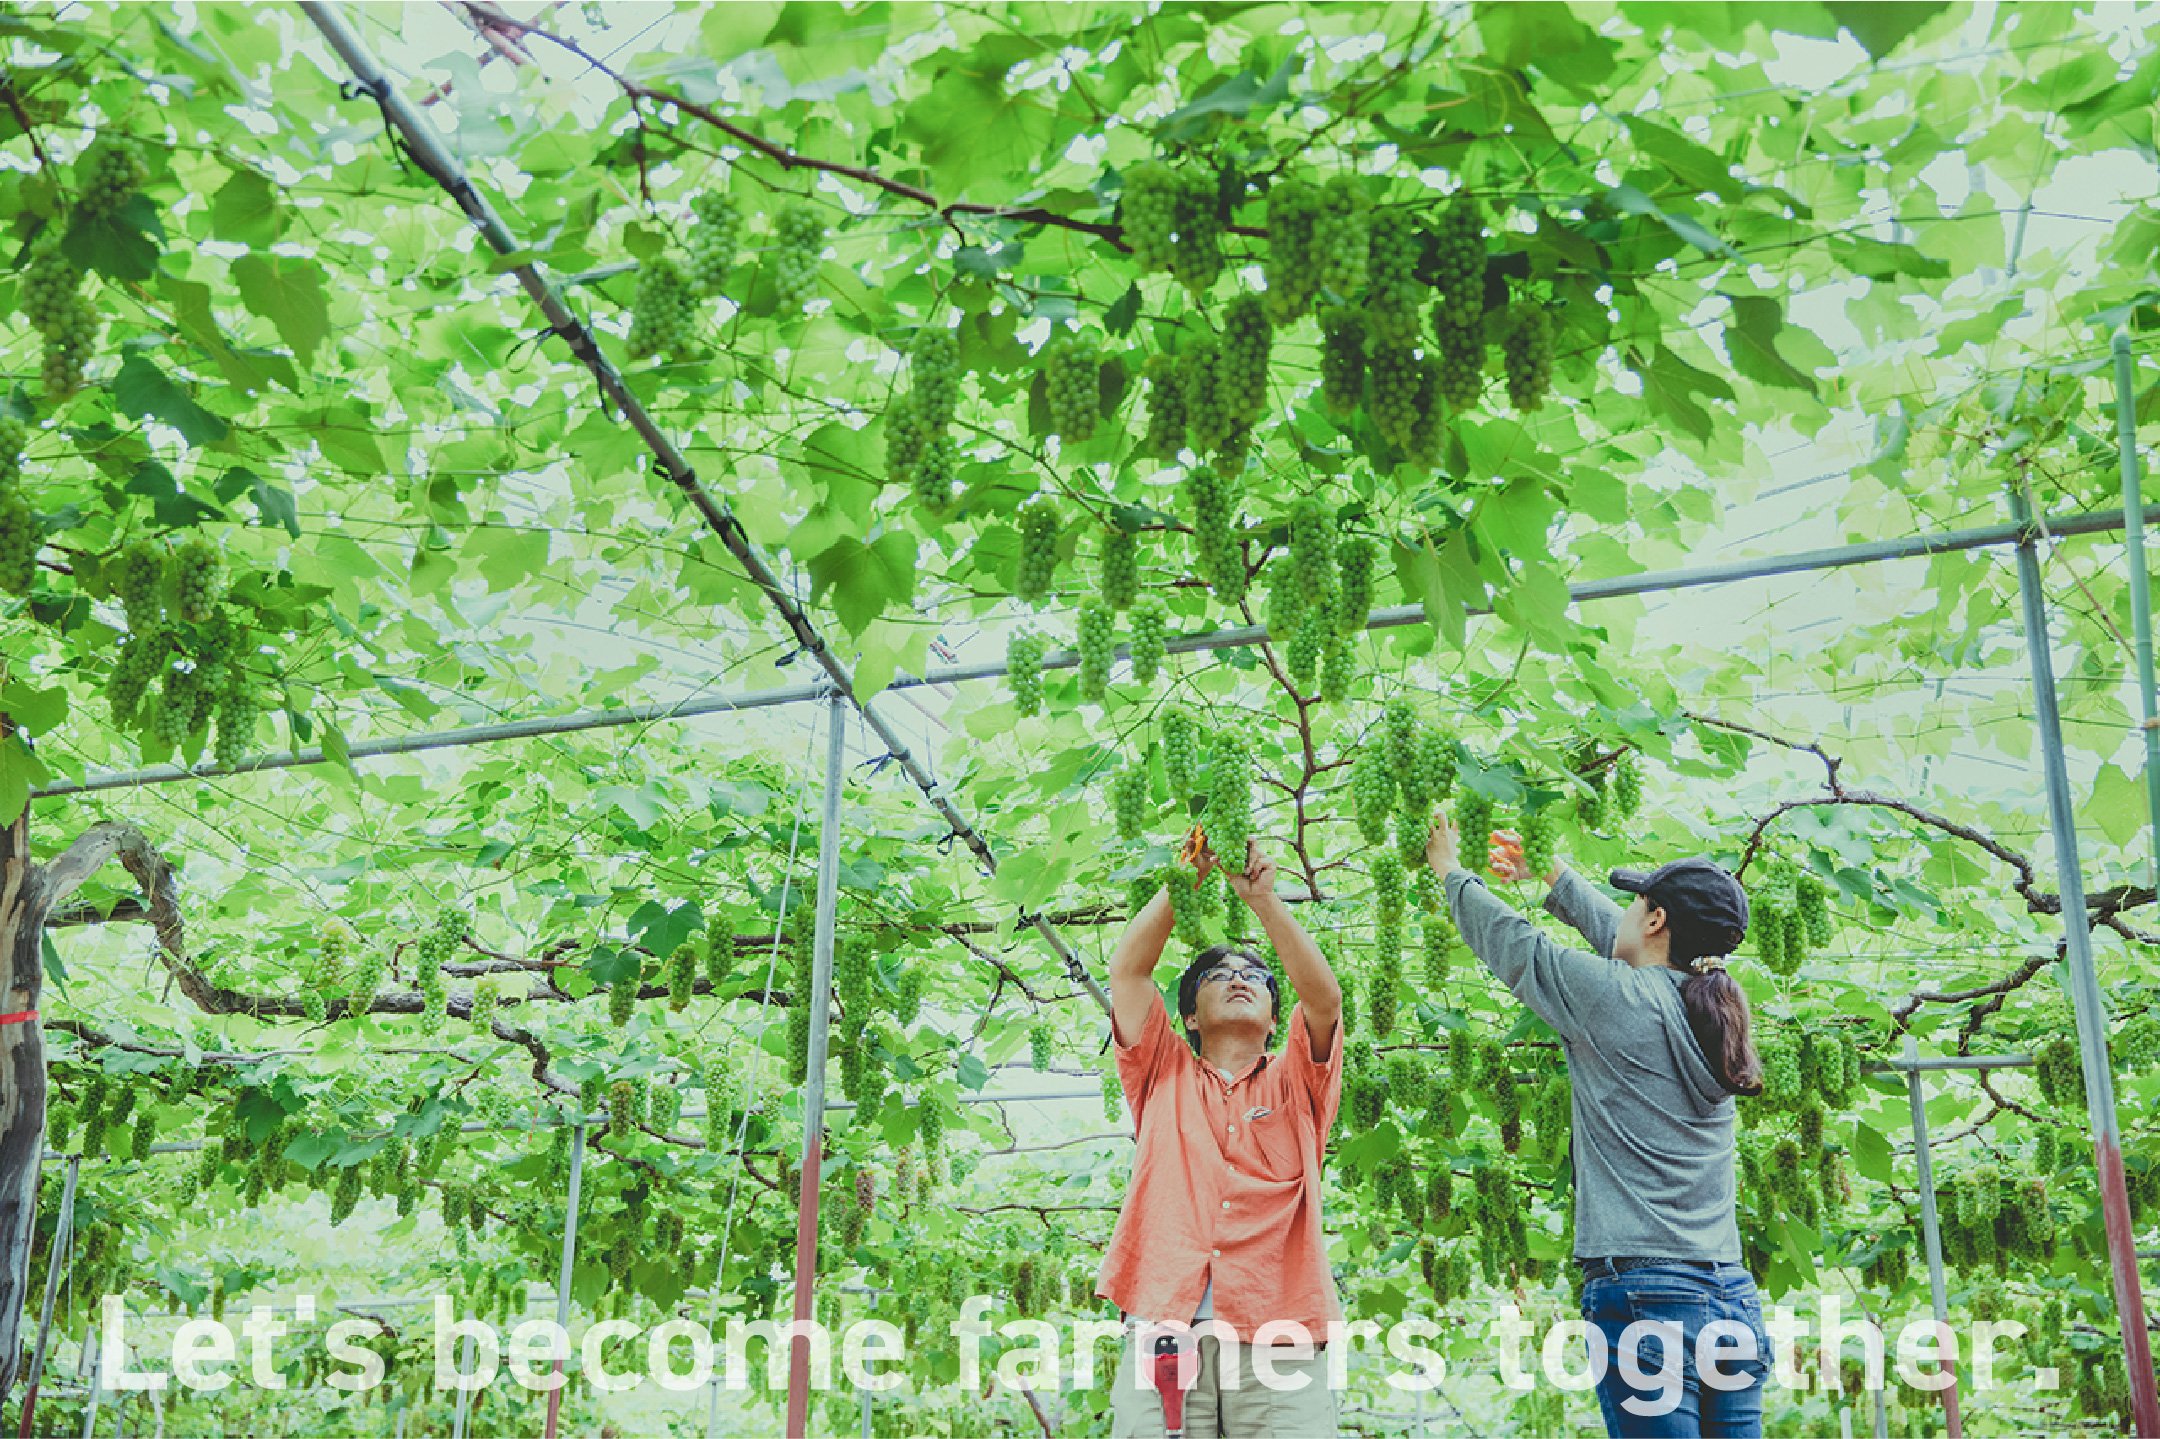 Let's become farmers together.